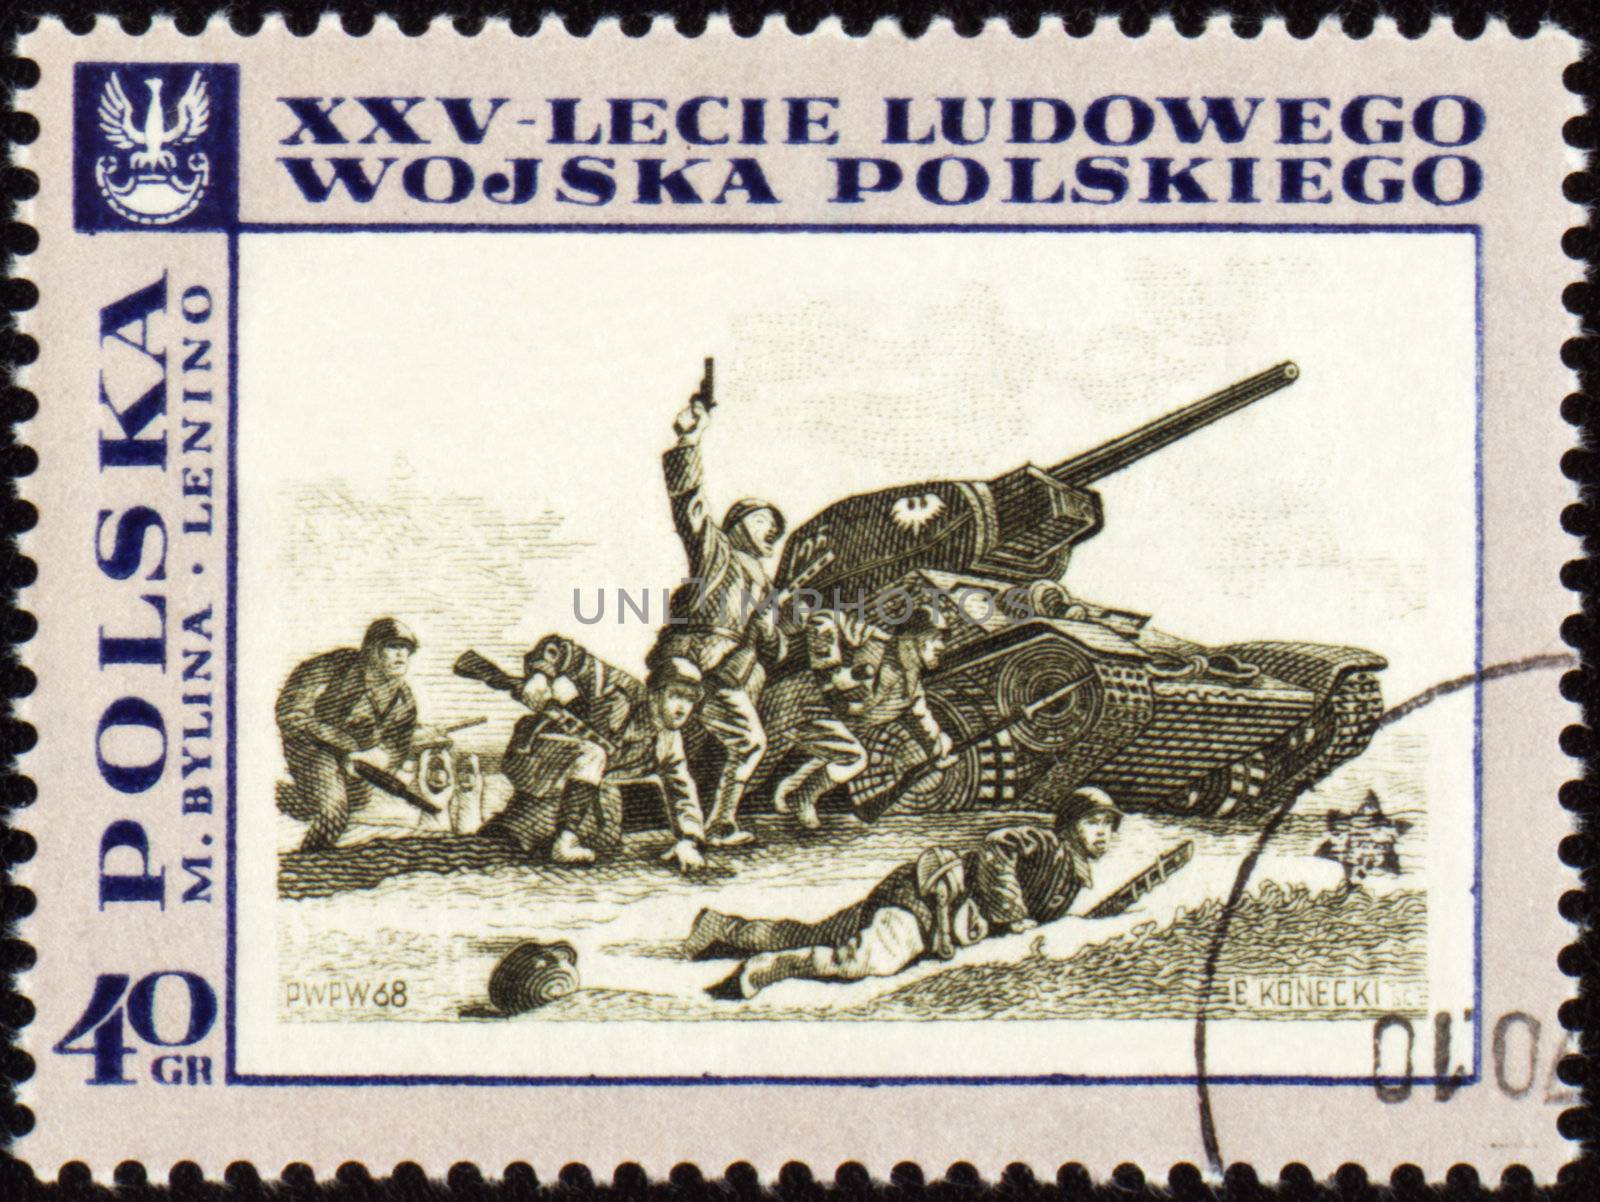 POLAND - CIRCA 1968: A post stamp printed in Poland shows tank attack, devoted to the 25th anniversary of Polish Army, circa 1968